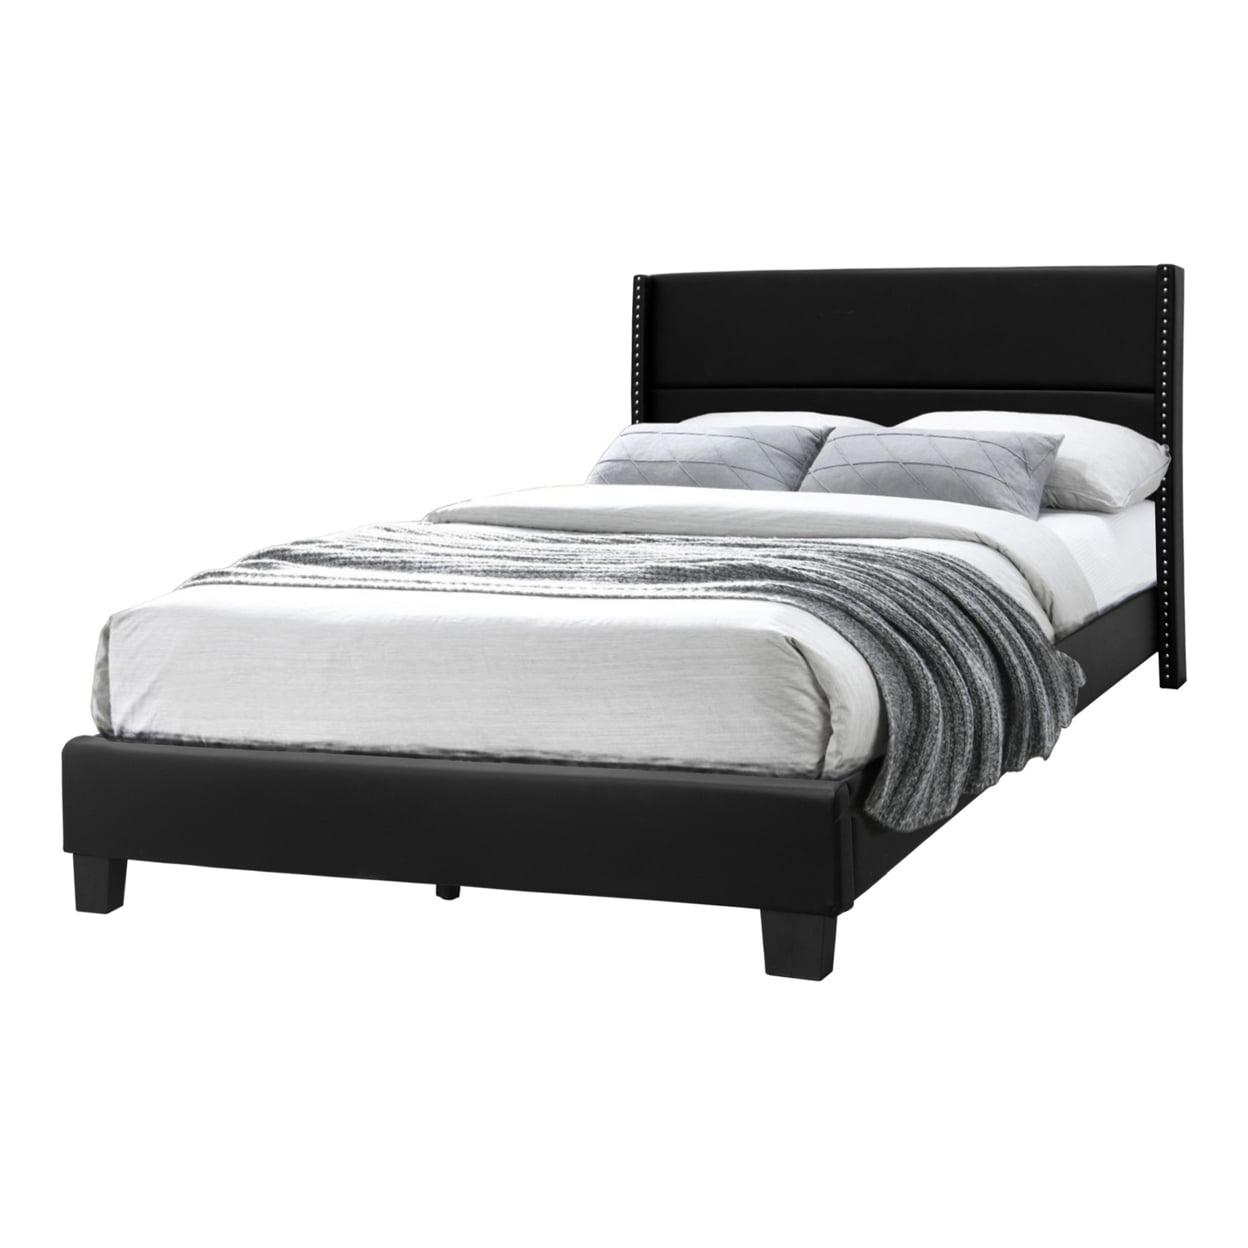 Better Home Products GIULIA-50-VEL-BLK